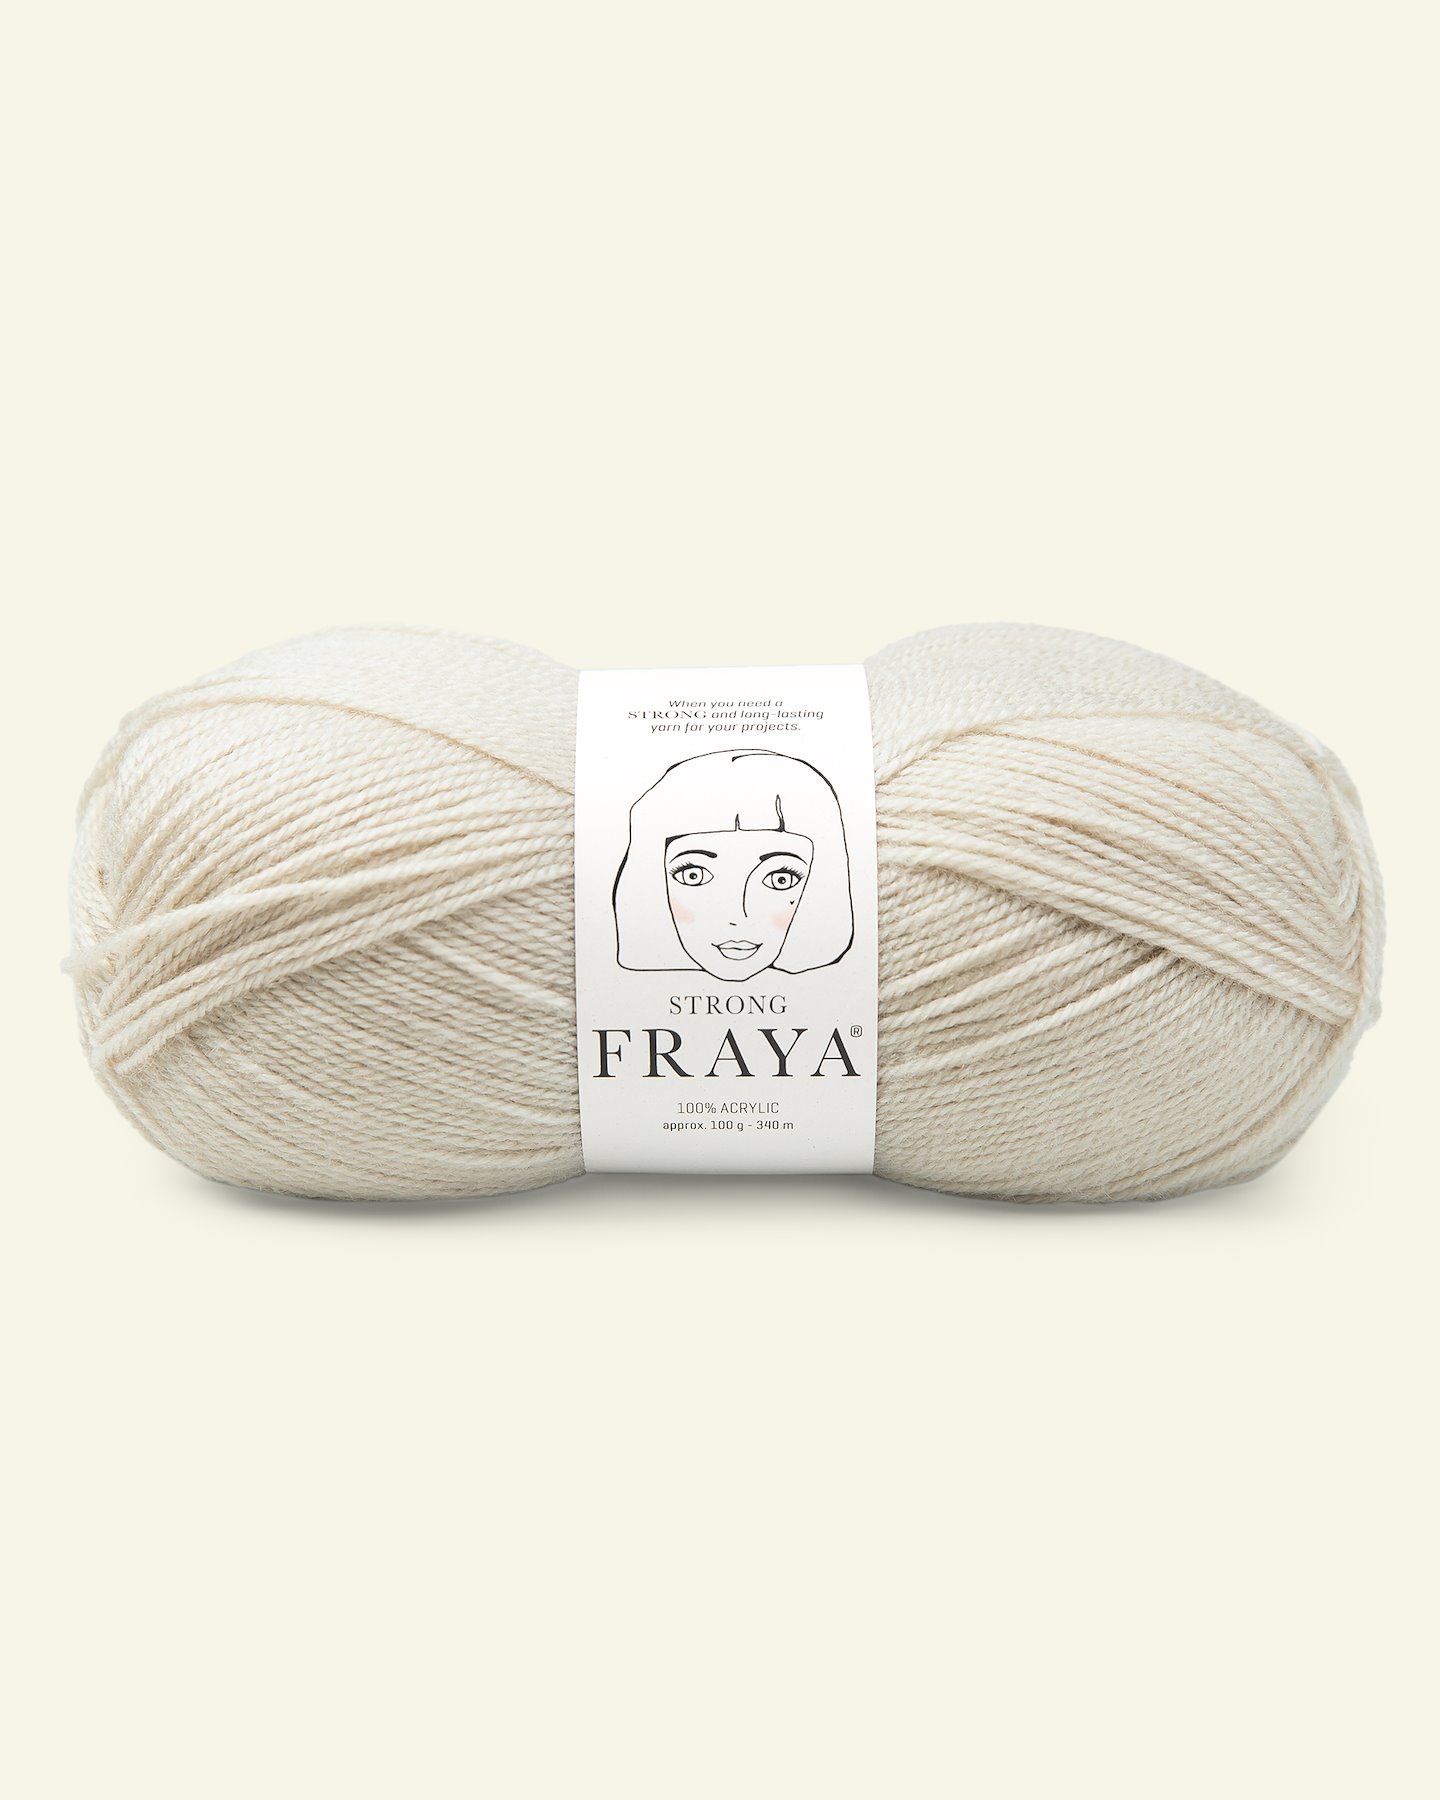 FRAYA, Wolle Acrylgarn "Strong" Natur 90066002_pack